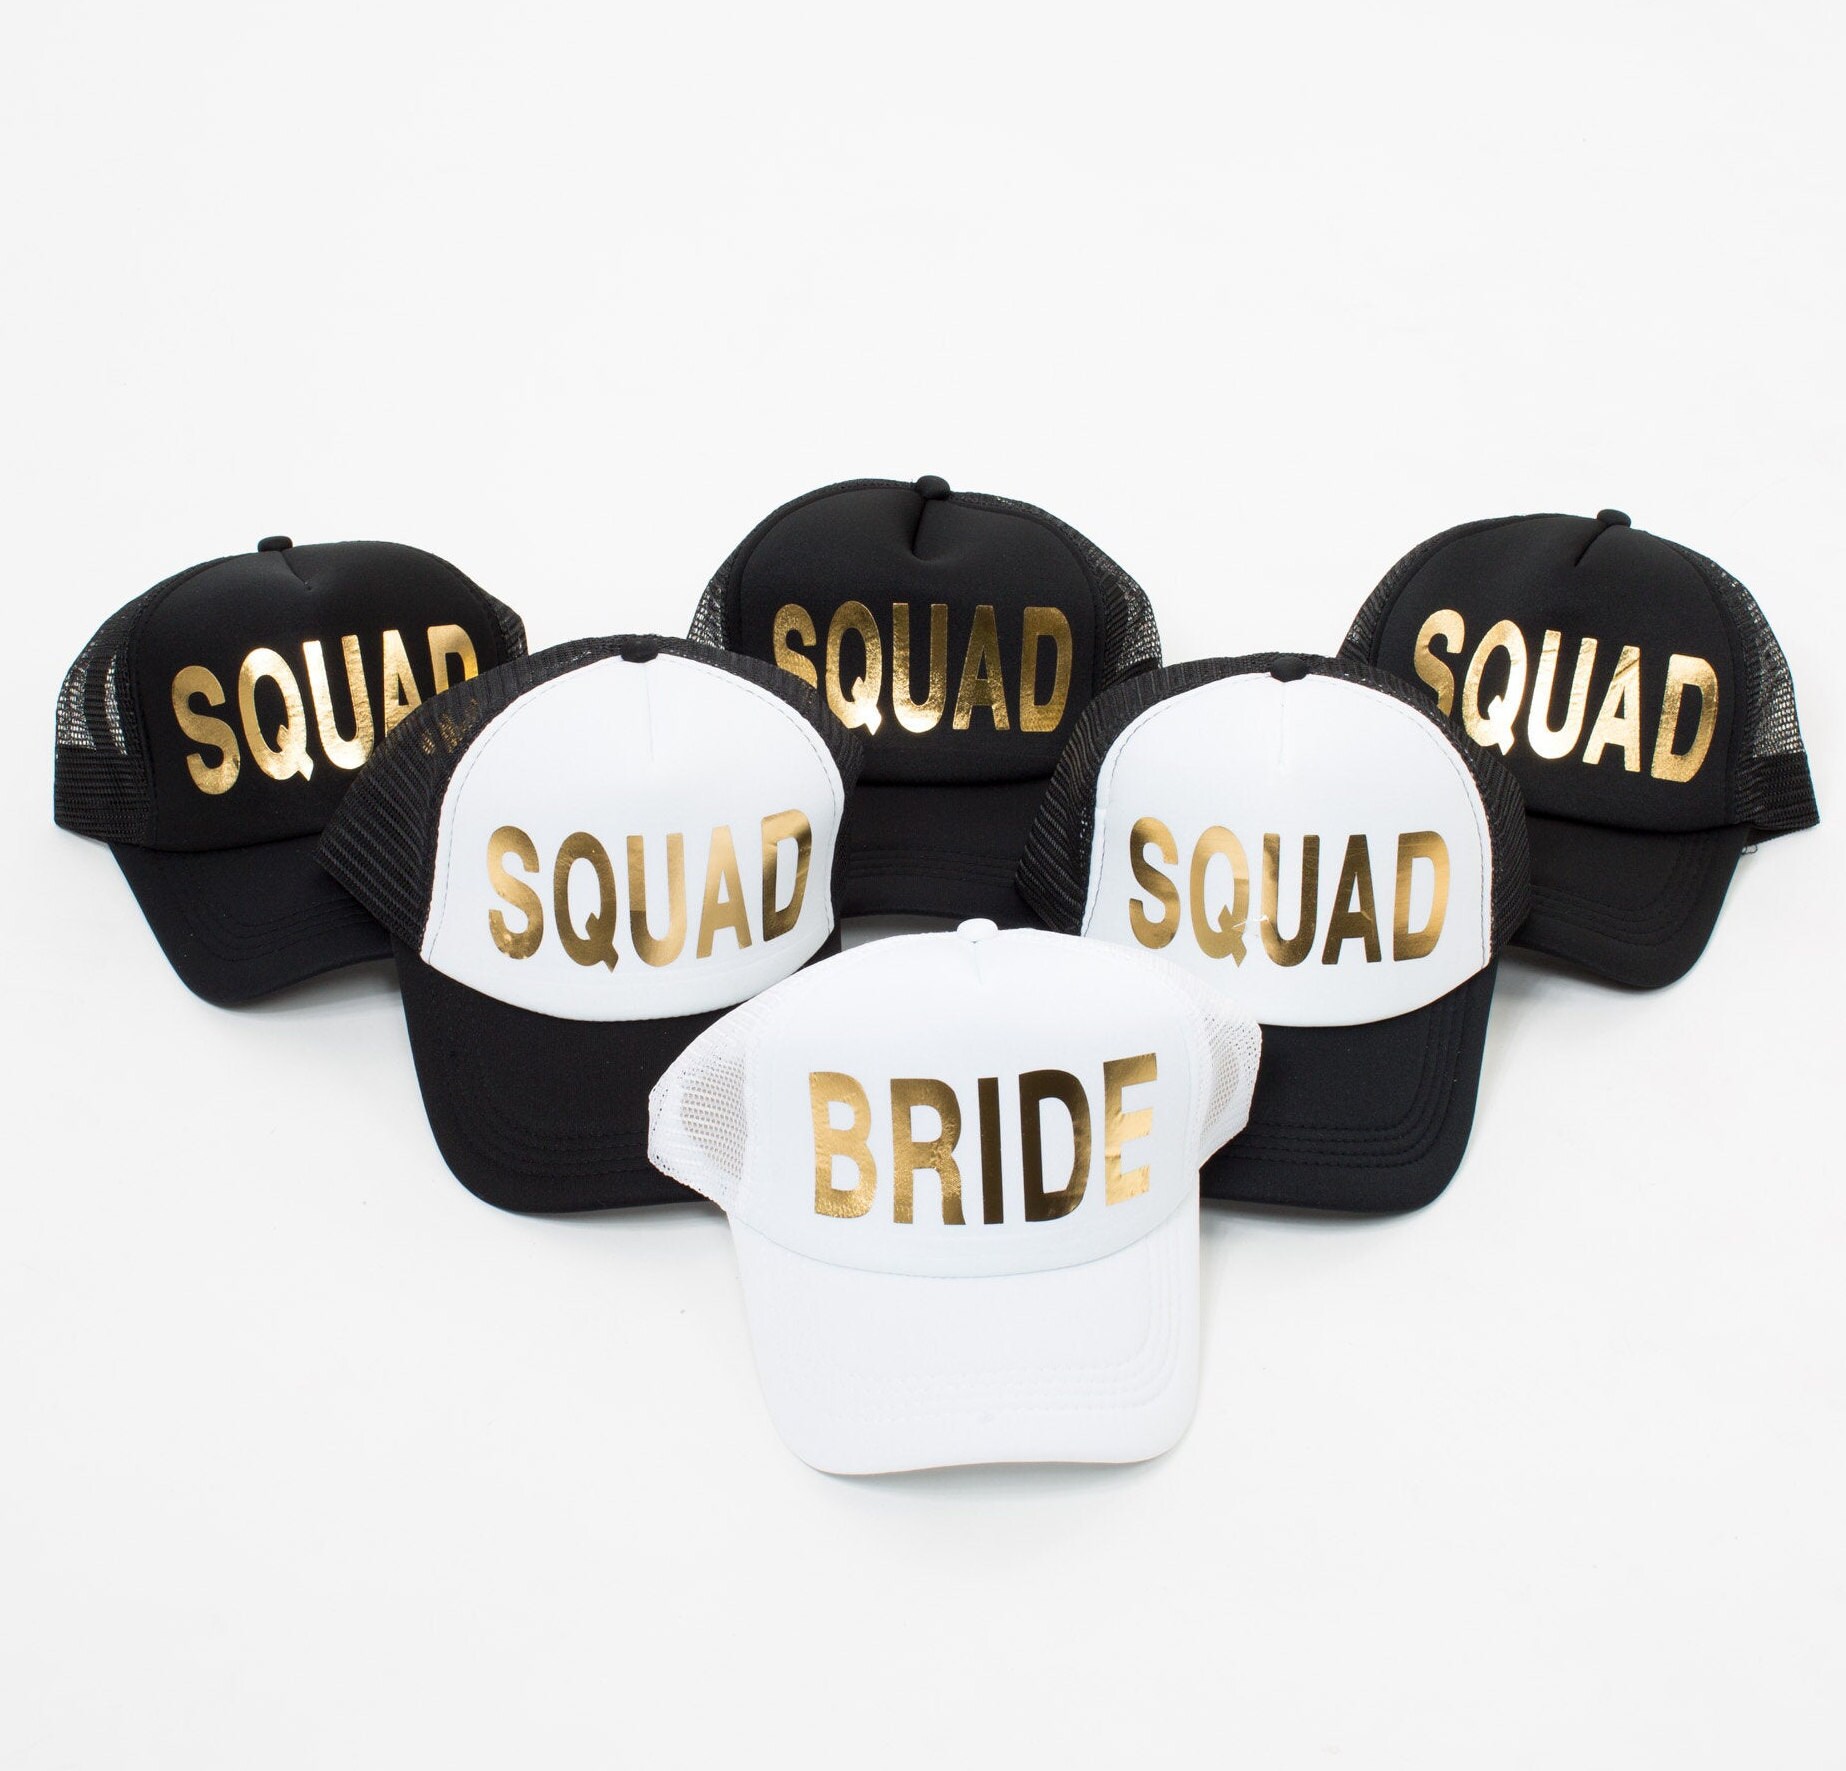 Hats for Bachelorette Party Bridesmaid Gifts Customized trucker hat Bridal hat Bridal Party Bride Squad Trucker hats bride sqaud-vinyl